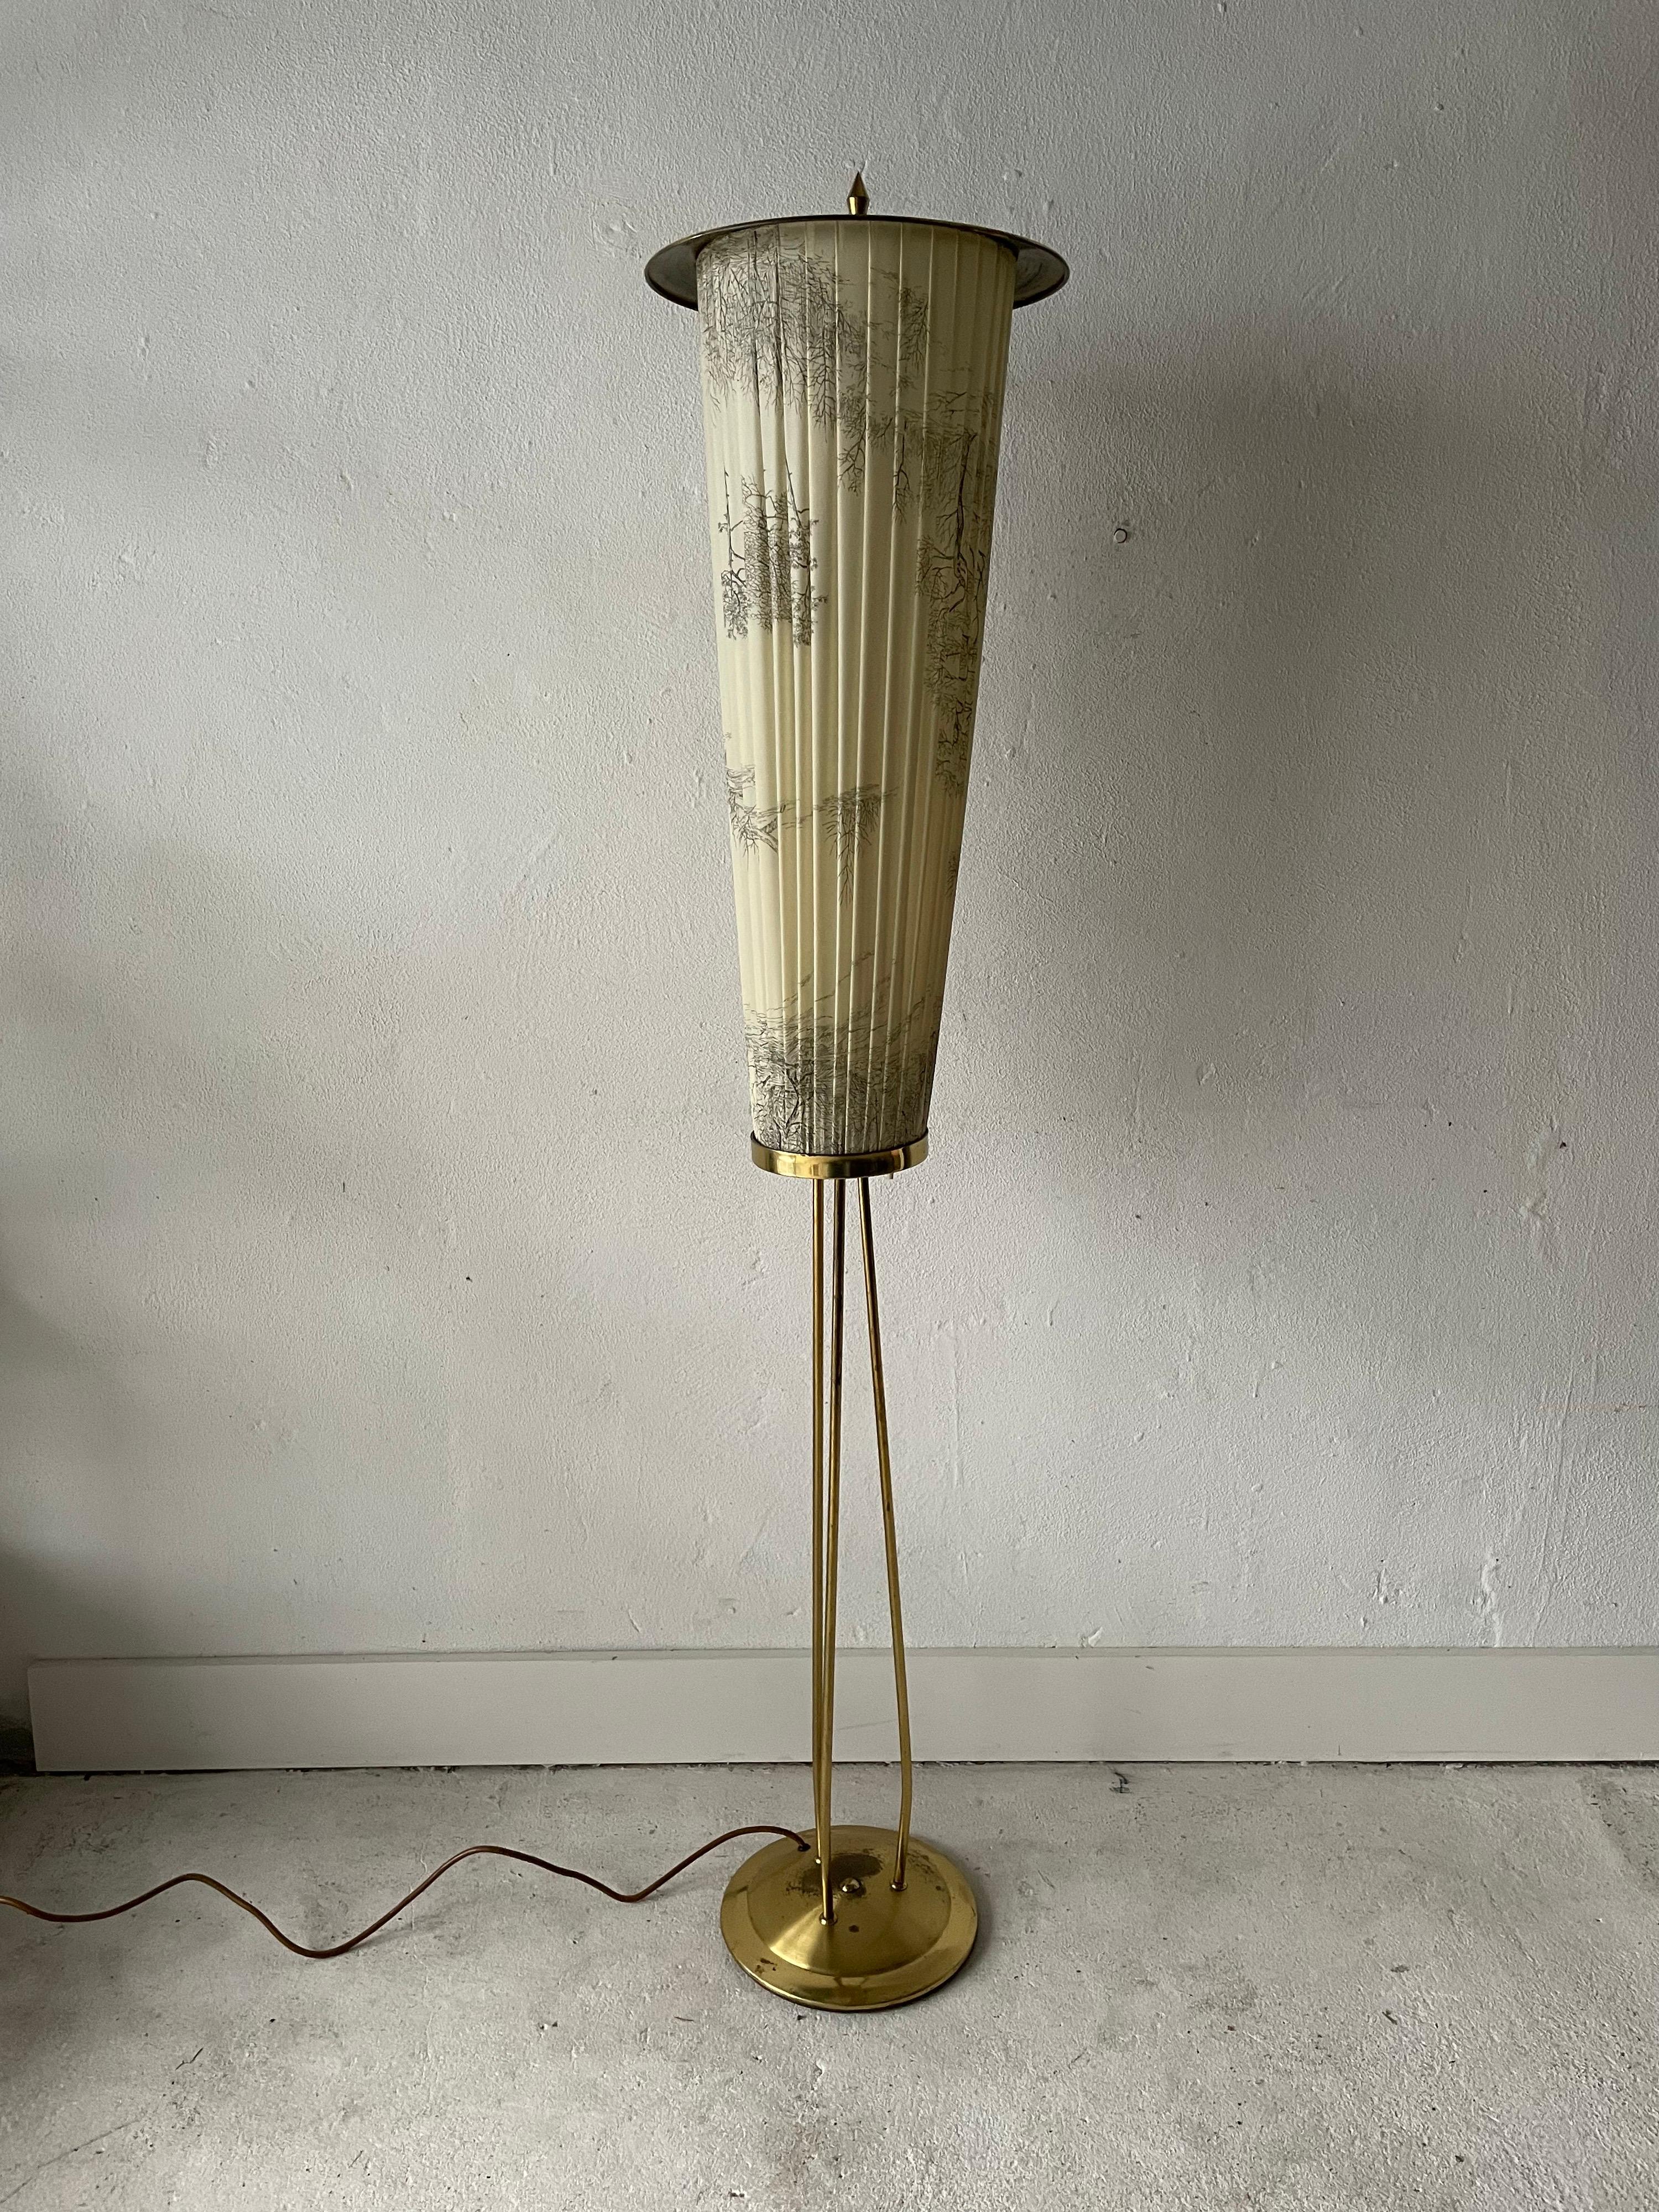 Mid-Century Modern brass and illustrated fabric floor lamp, 1950s, Germany

Lamp is in very good vintage condition.

This lamp works with 2 x E27 light bulb. Max 100W
Wired and suitable to use with 220V and 110V for all